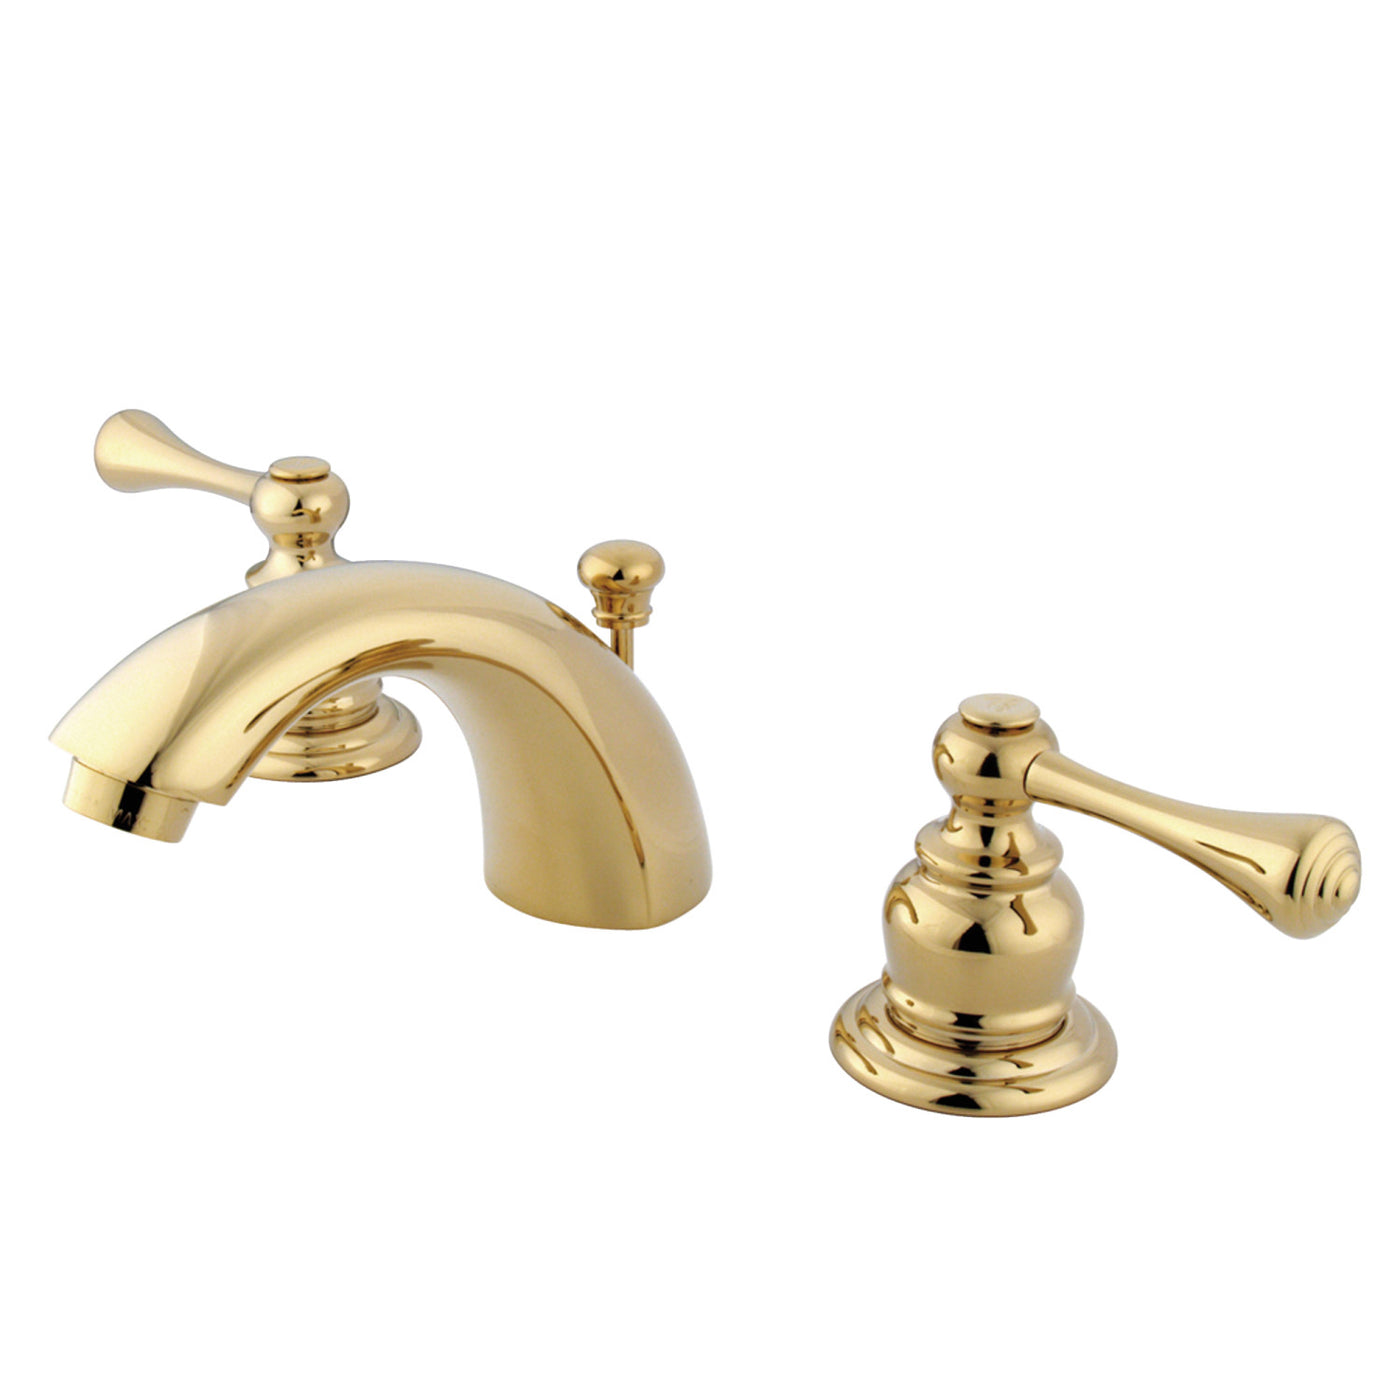 Elements of Design EB3942BL Mini-Widespread Bathroom Faucet, Polished Brass